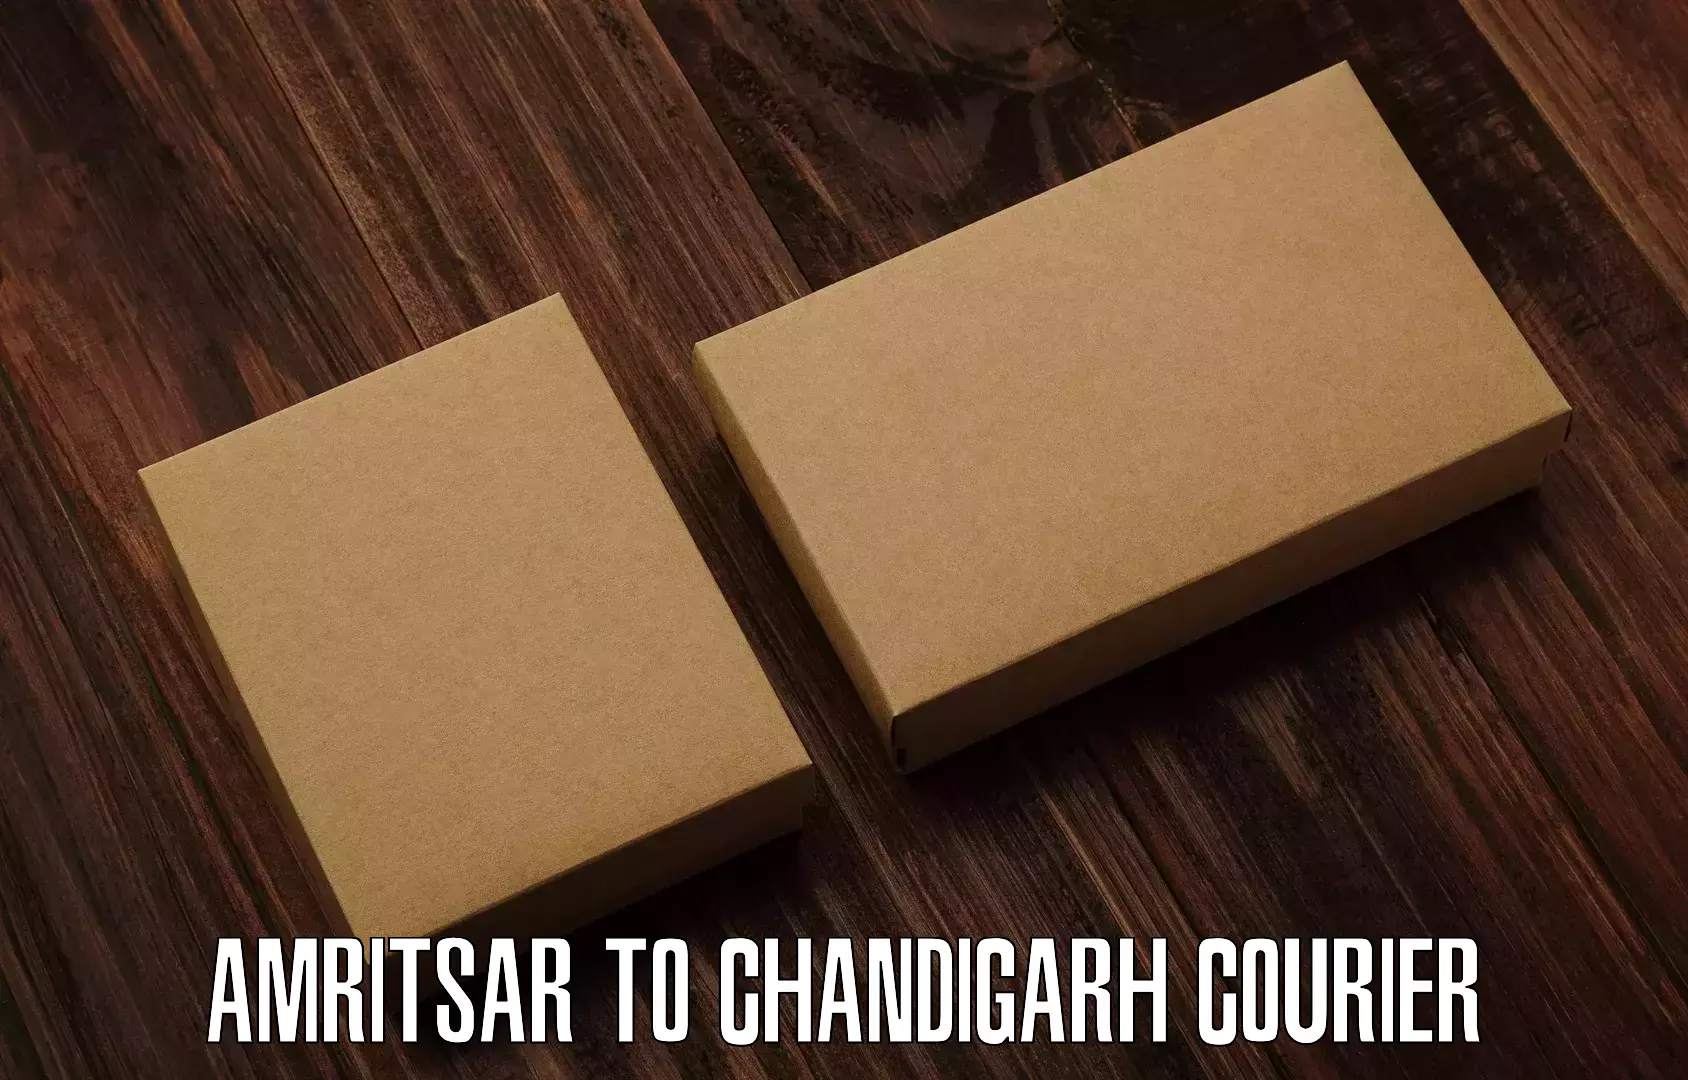 Customer-focused courier Amritsar to Chandigarh